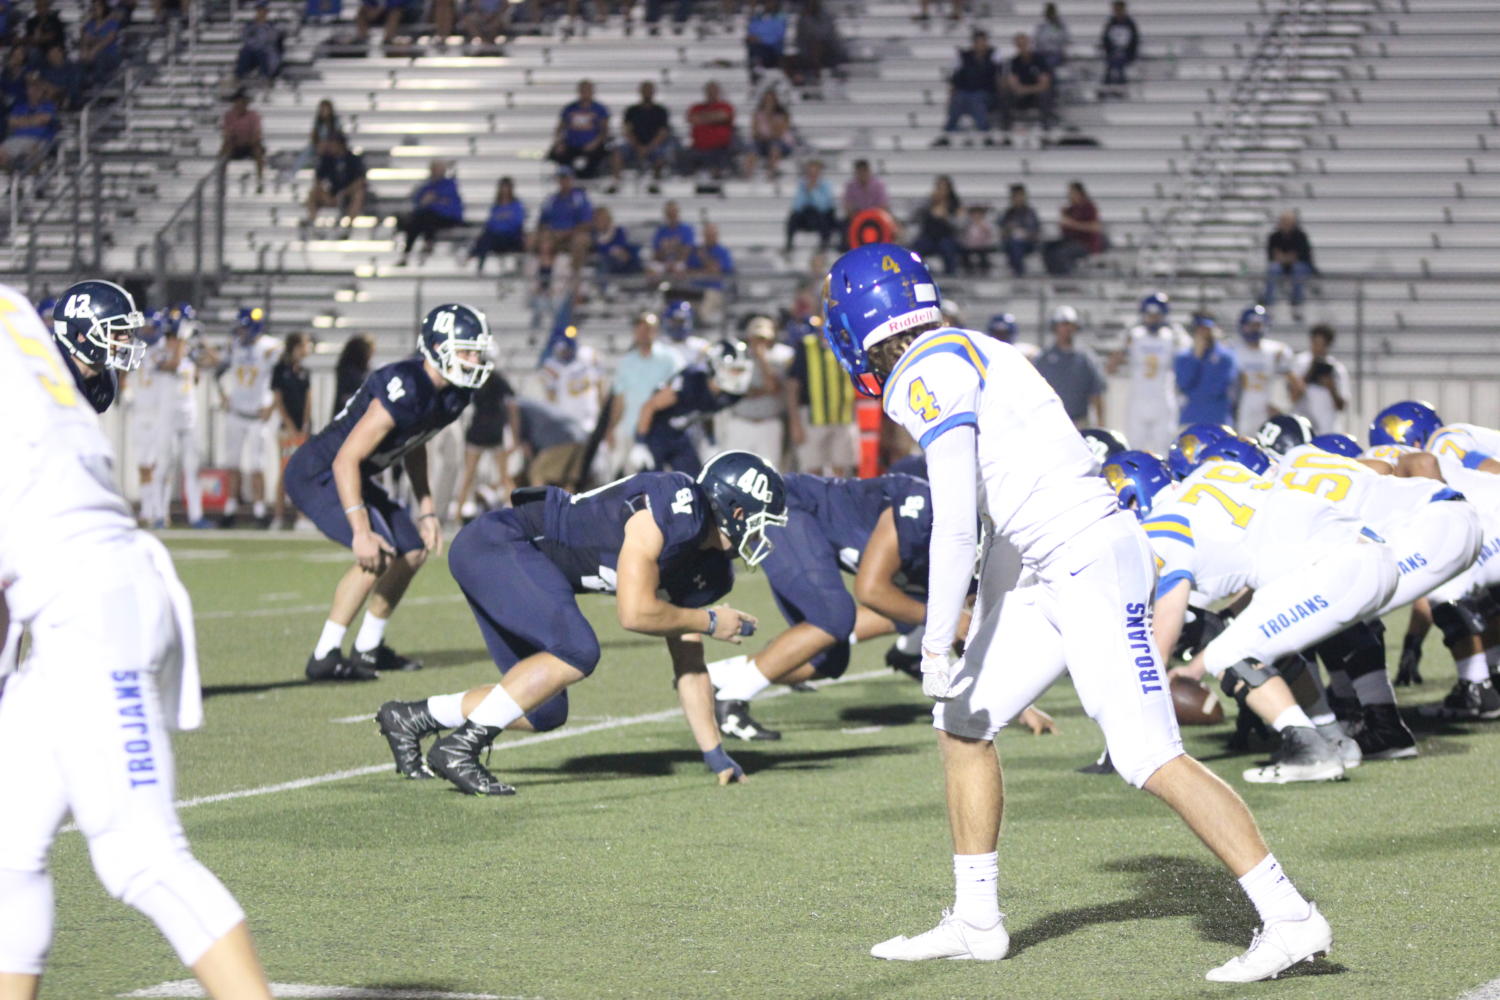 Senior CJ Kuehler lines up for the snap at the end of the first quarter.